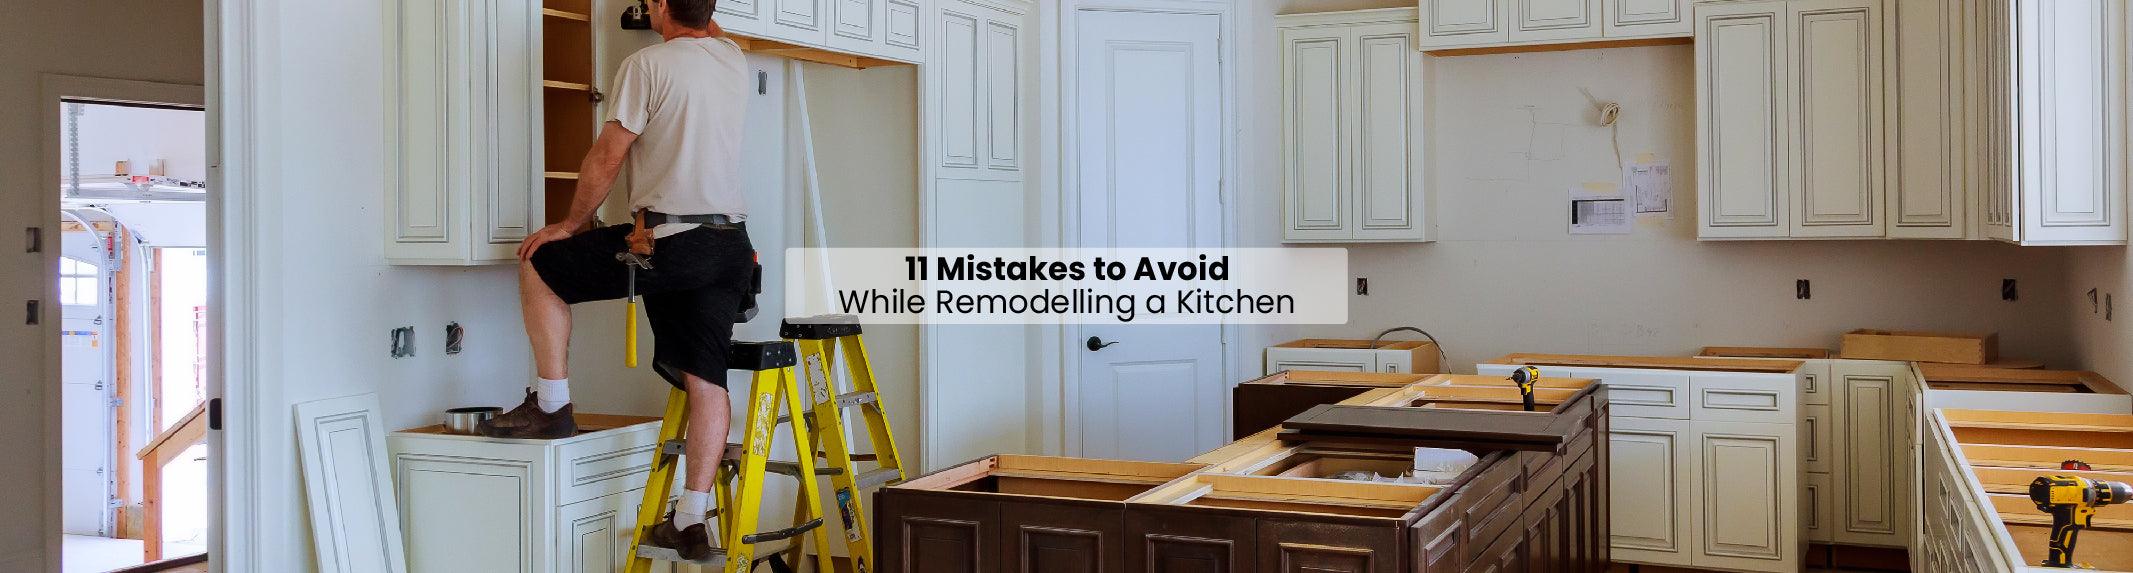 11 Mistakes to Avoid While Remodelling a Kitchen - Lipka Home